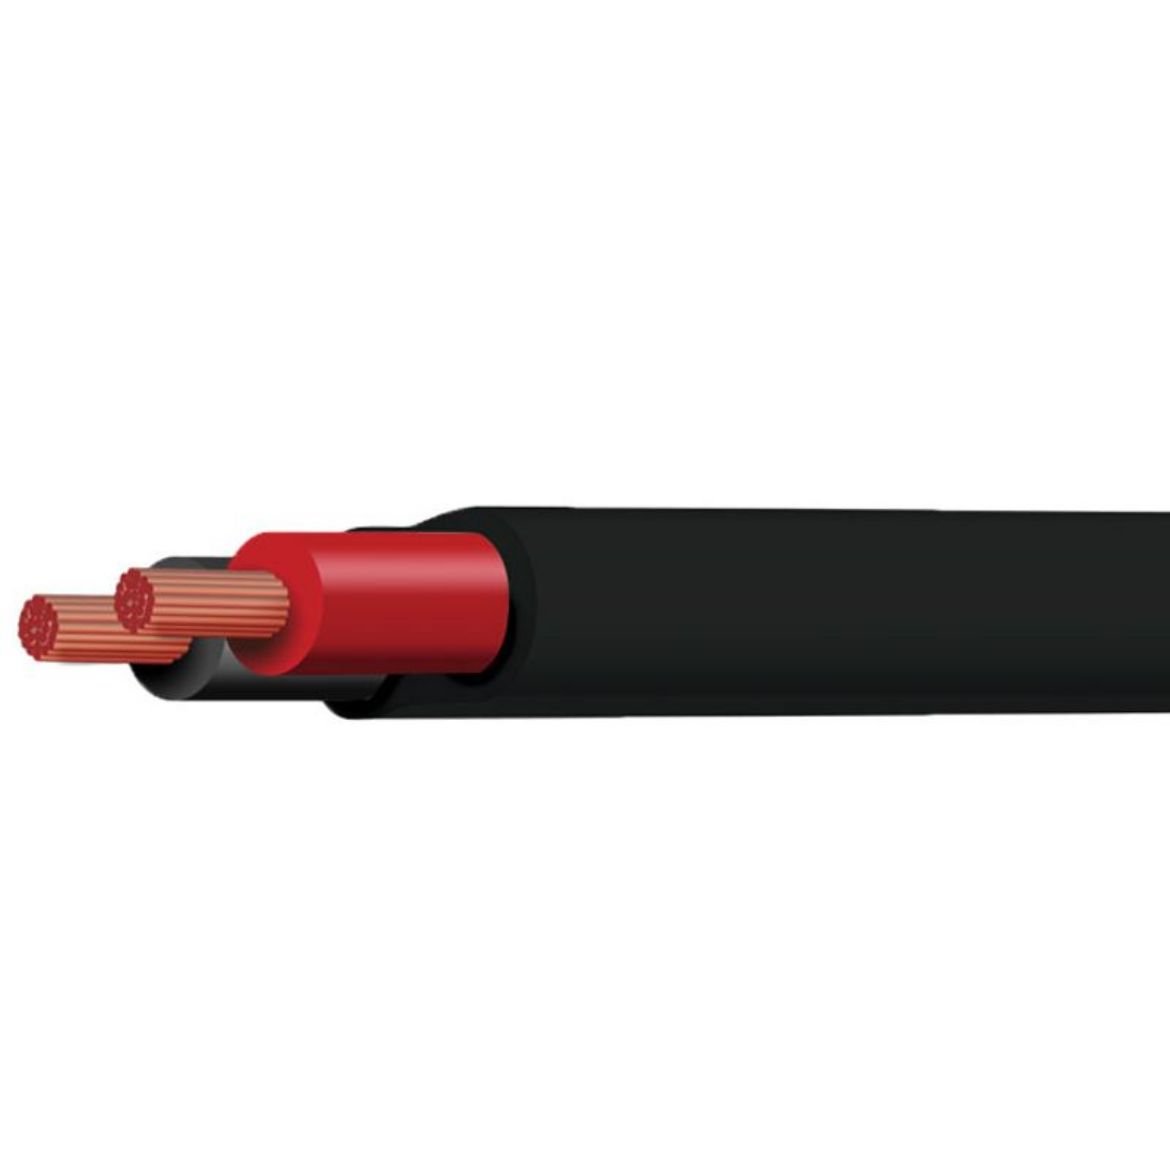 Picture of TYCAB 3MM TWIN CORE CABLE CUT 16A TWIN SHEATH BLACK/RED - PER METER